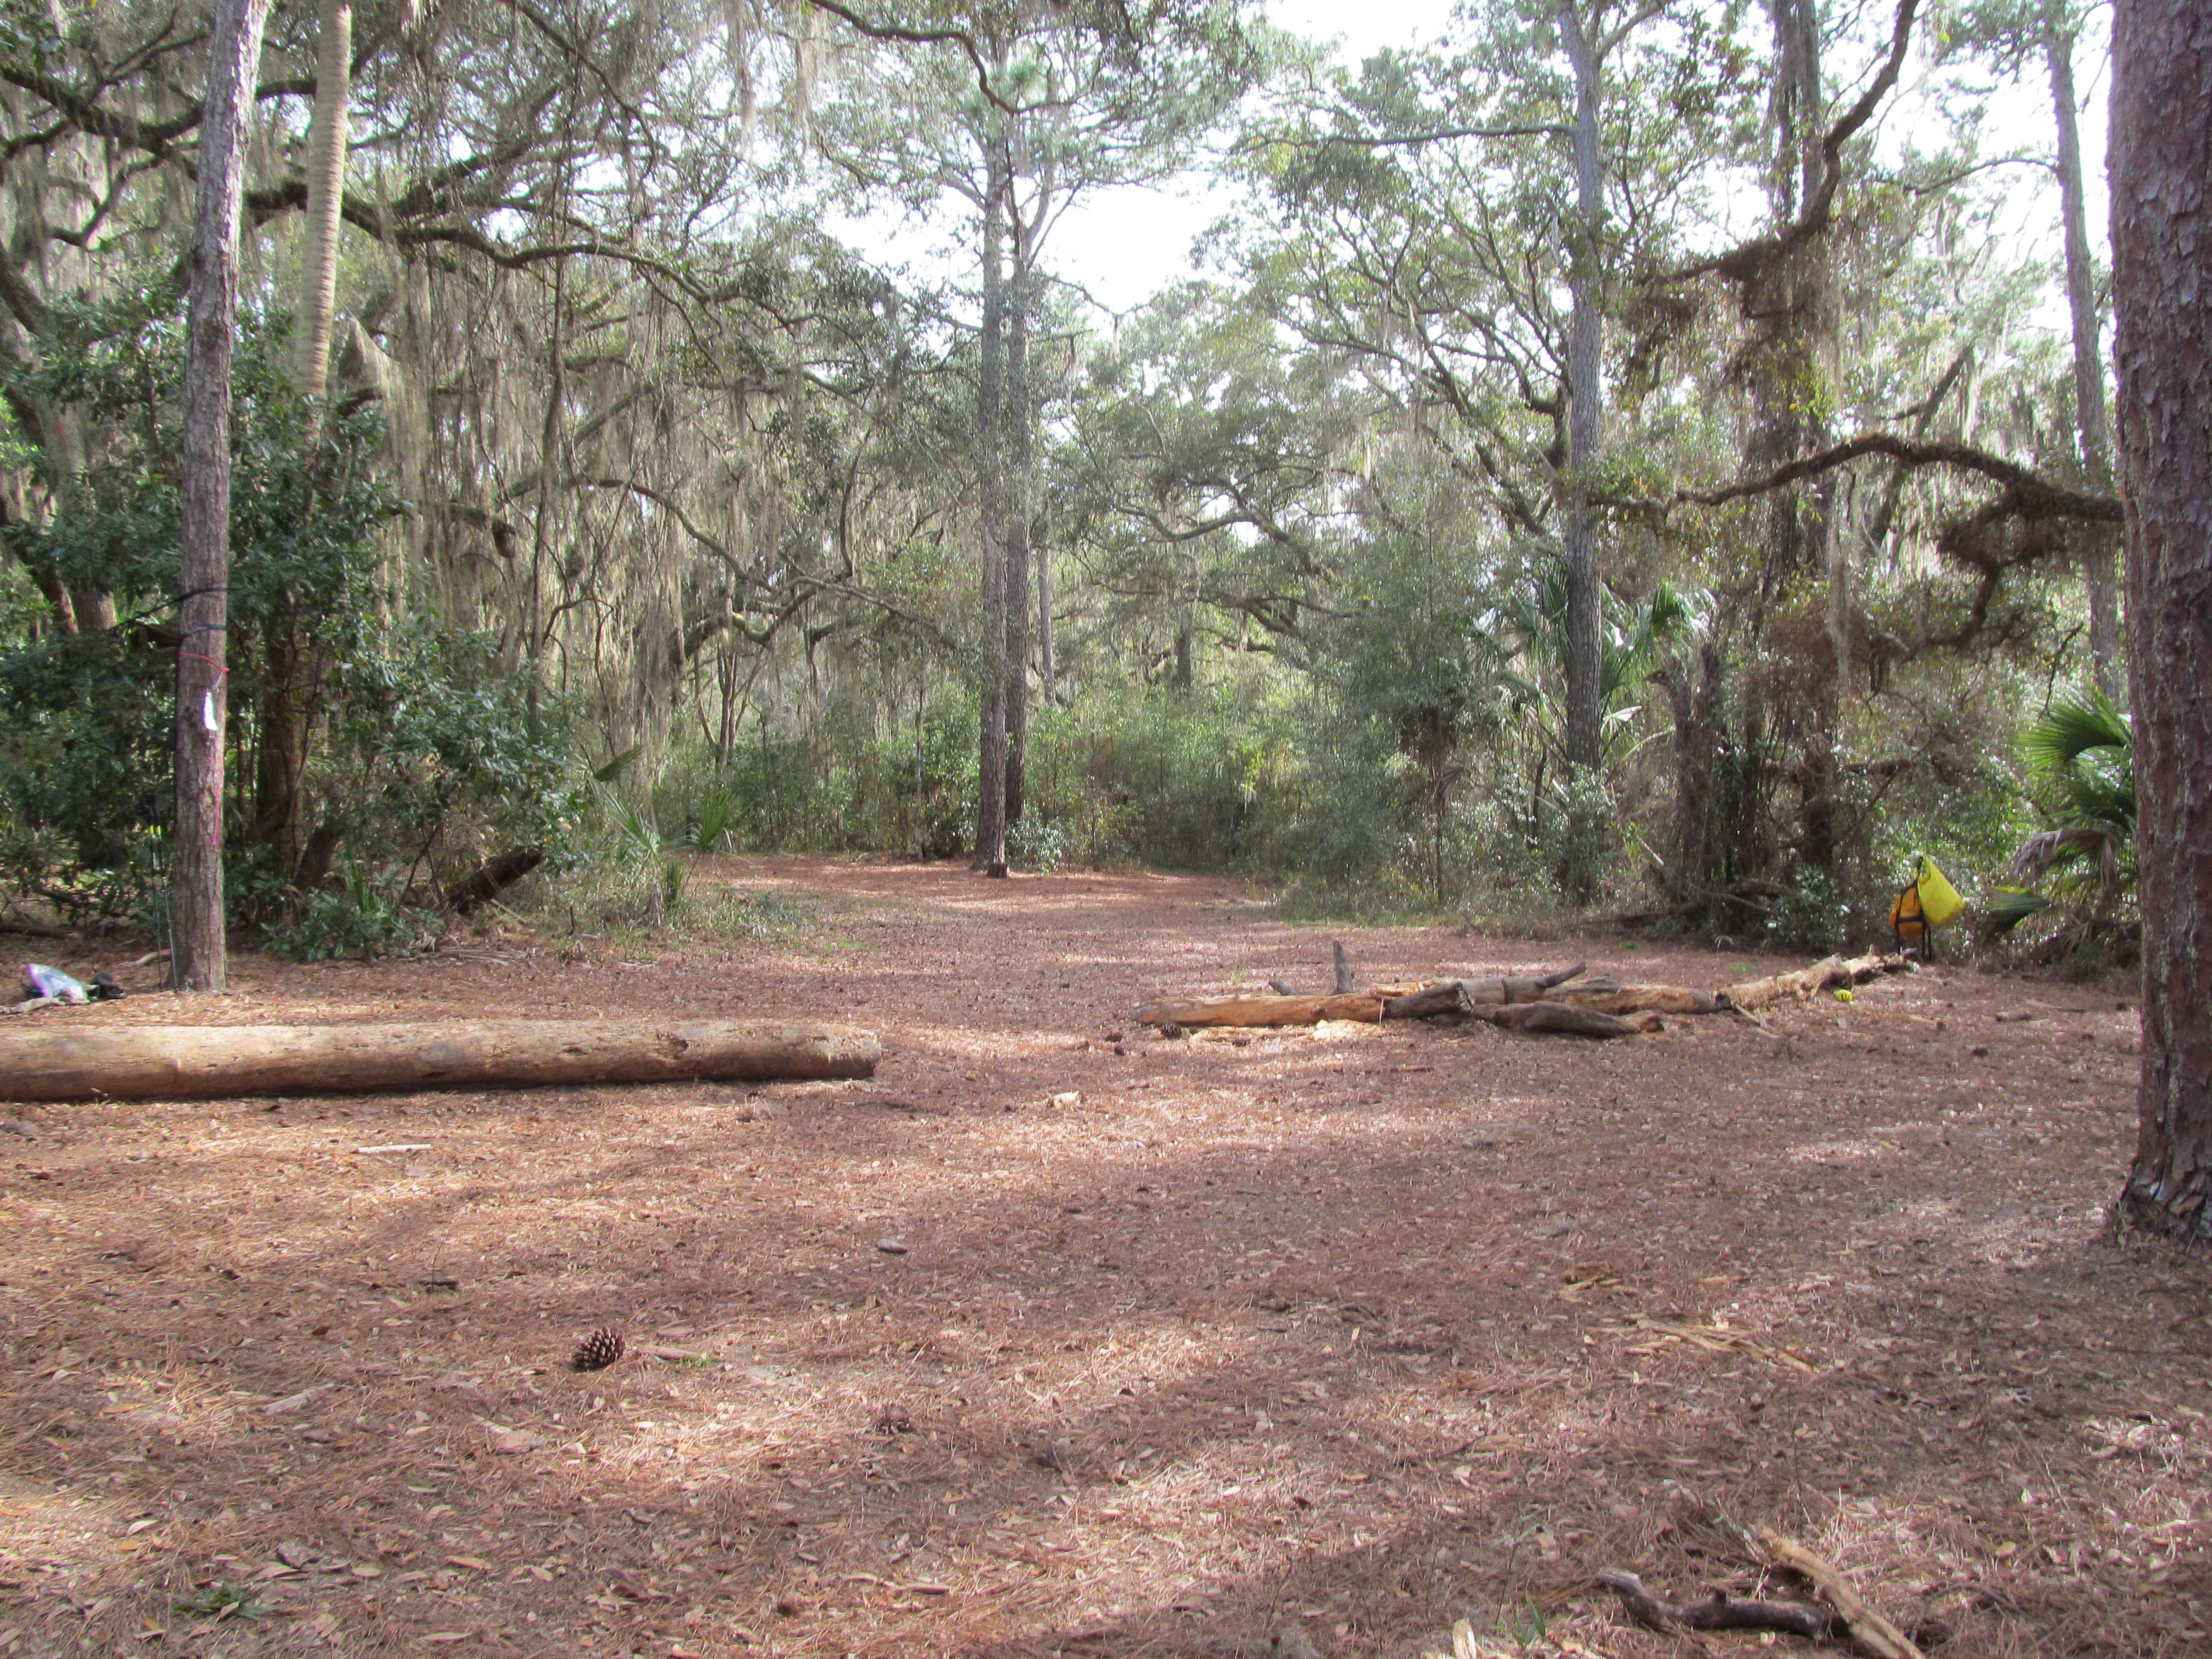 Open pine needle covered ground surrounded by live oaks, pines, and palmettos